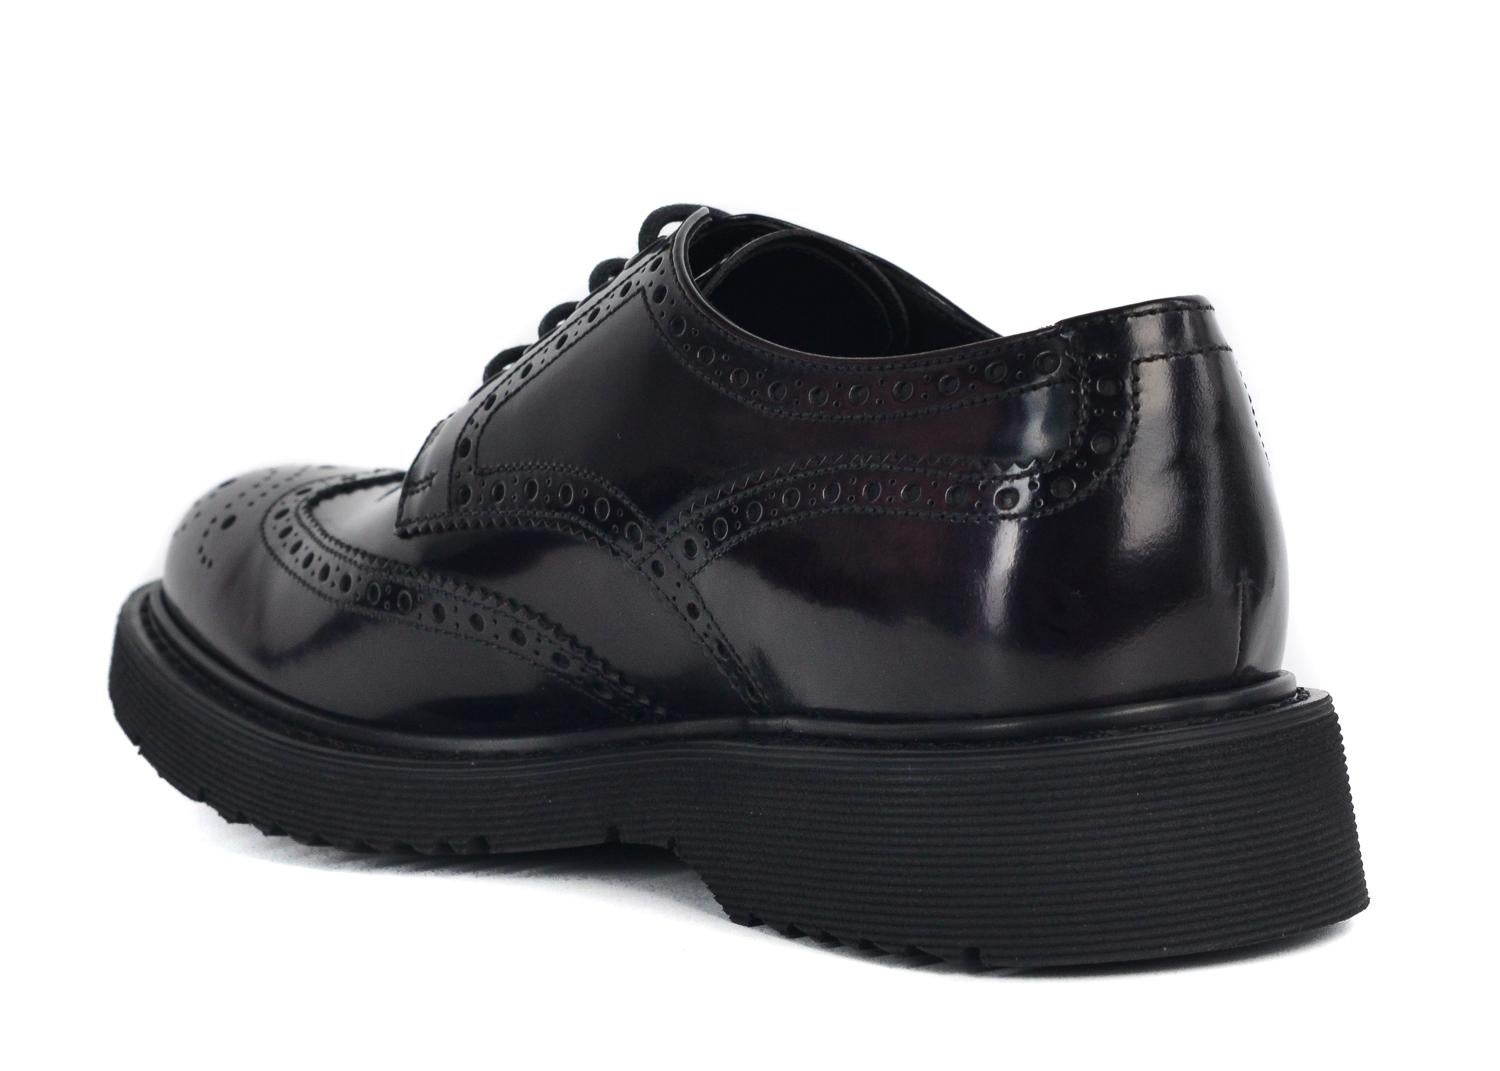 Prada Men Black Patent Leather Brogue Platform Oxfords In New Condition For Sale In Brooklyn, NY